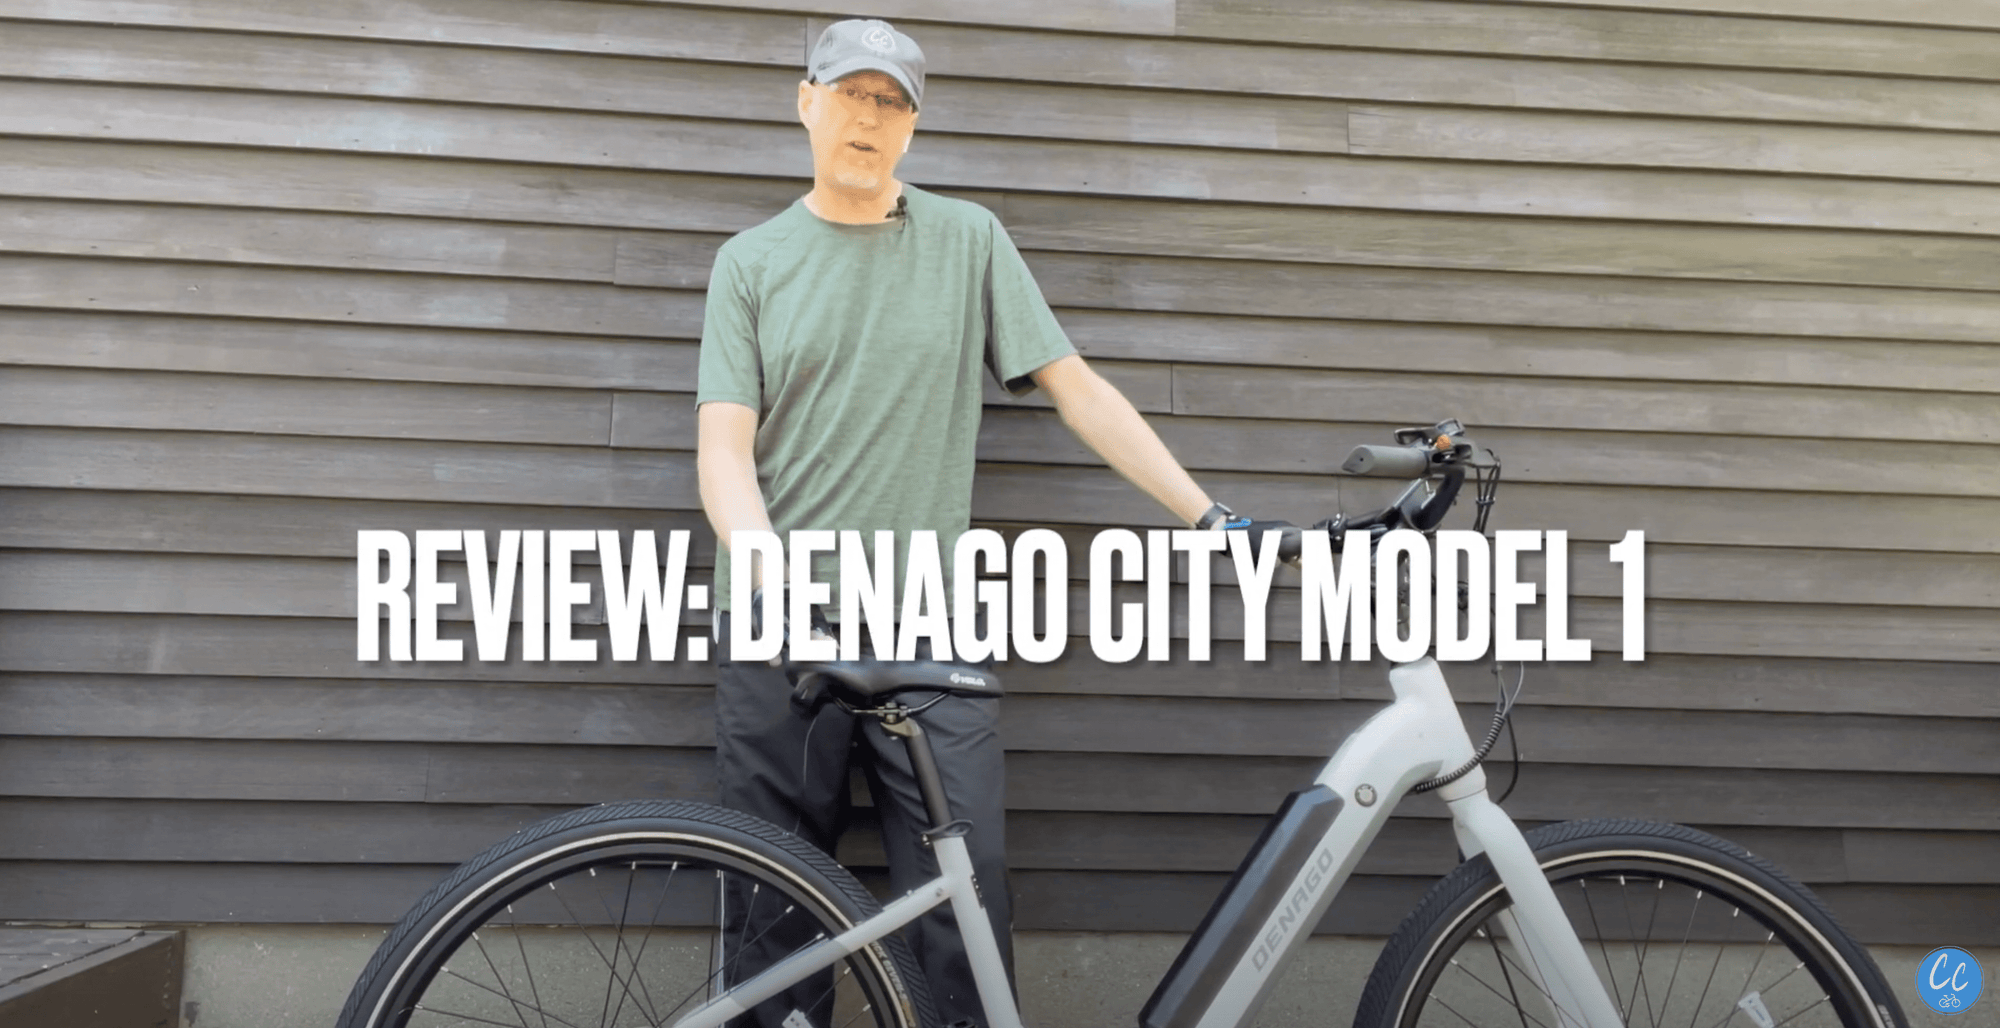 Video review of the Denago City Model 1 on the Chris Crossed YouTube channel